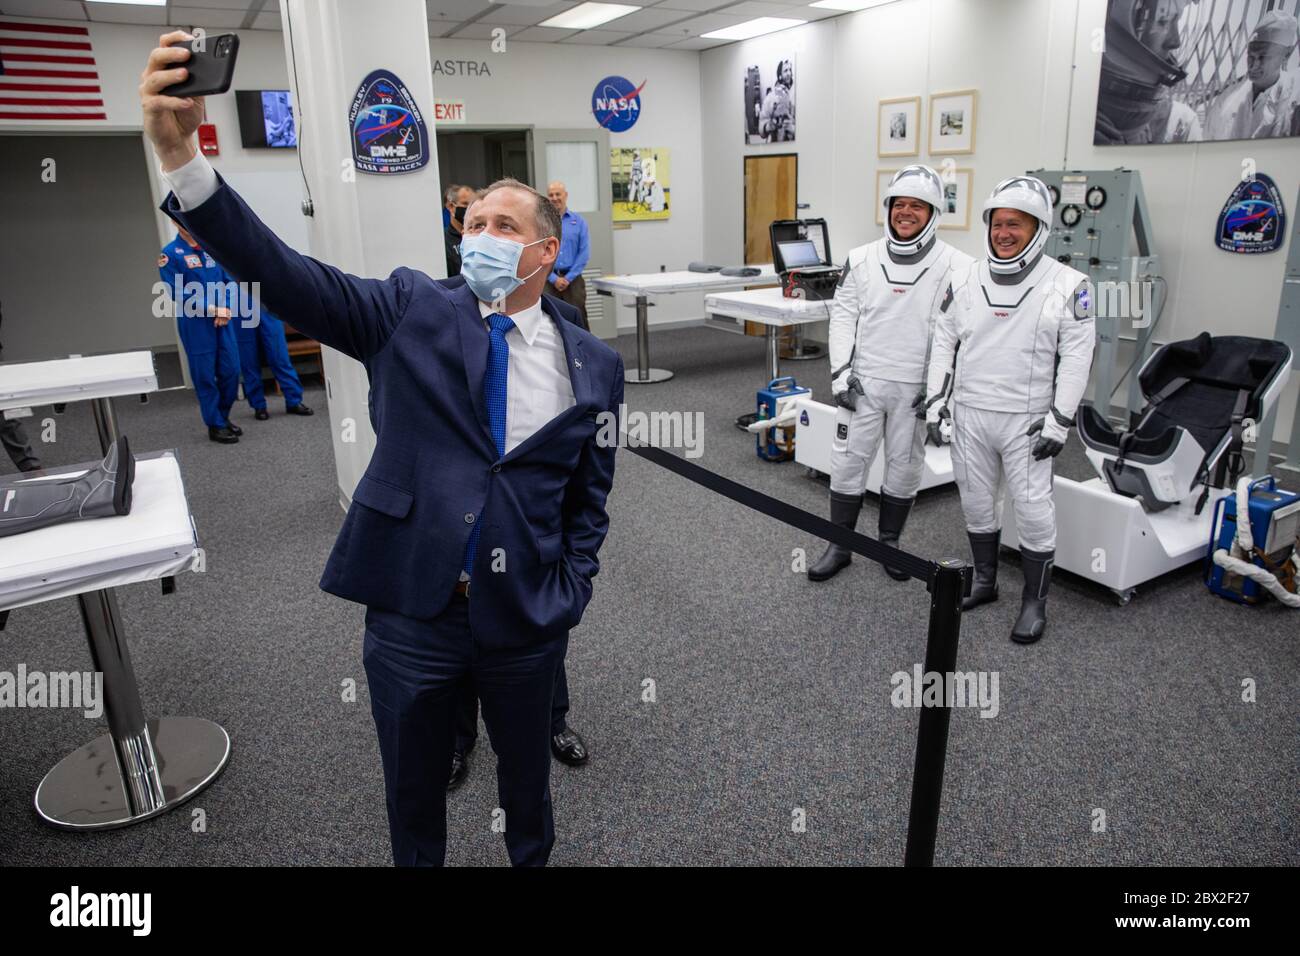 NASA Administrator Jim Bridenstine poses for a selfie with astronauts Robert Behnken, left, and Douglas Hurley, right, in their SpaceX spacesuits, after suiting up in the Neil Armstrong Operations and Checkout Building to Launch Complex 39A for the Demo-2 mission launch at the Kennedy Space Center May 30, 2020 Cape Canaveral, in Florida. The astronauts will make a second attempt at launch in the first commercial launch carrying astronauts to the International Space Station. Stock Photo